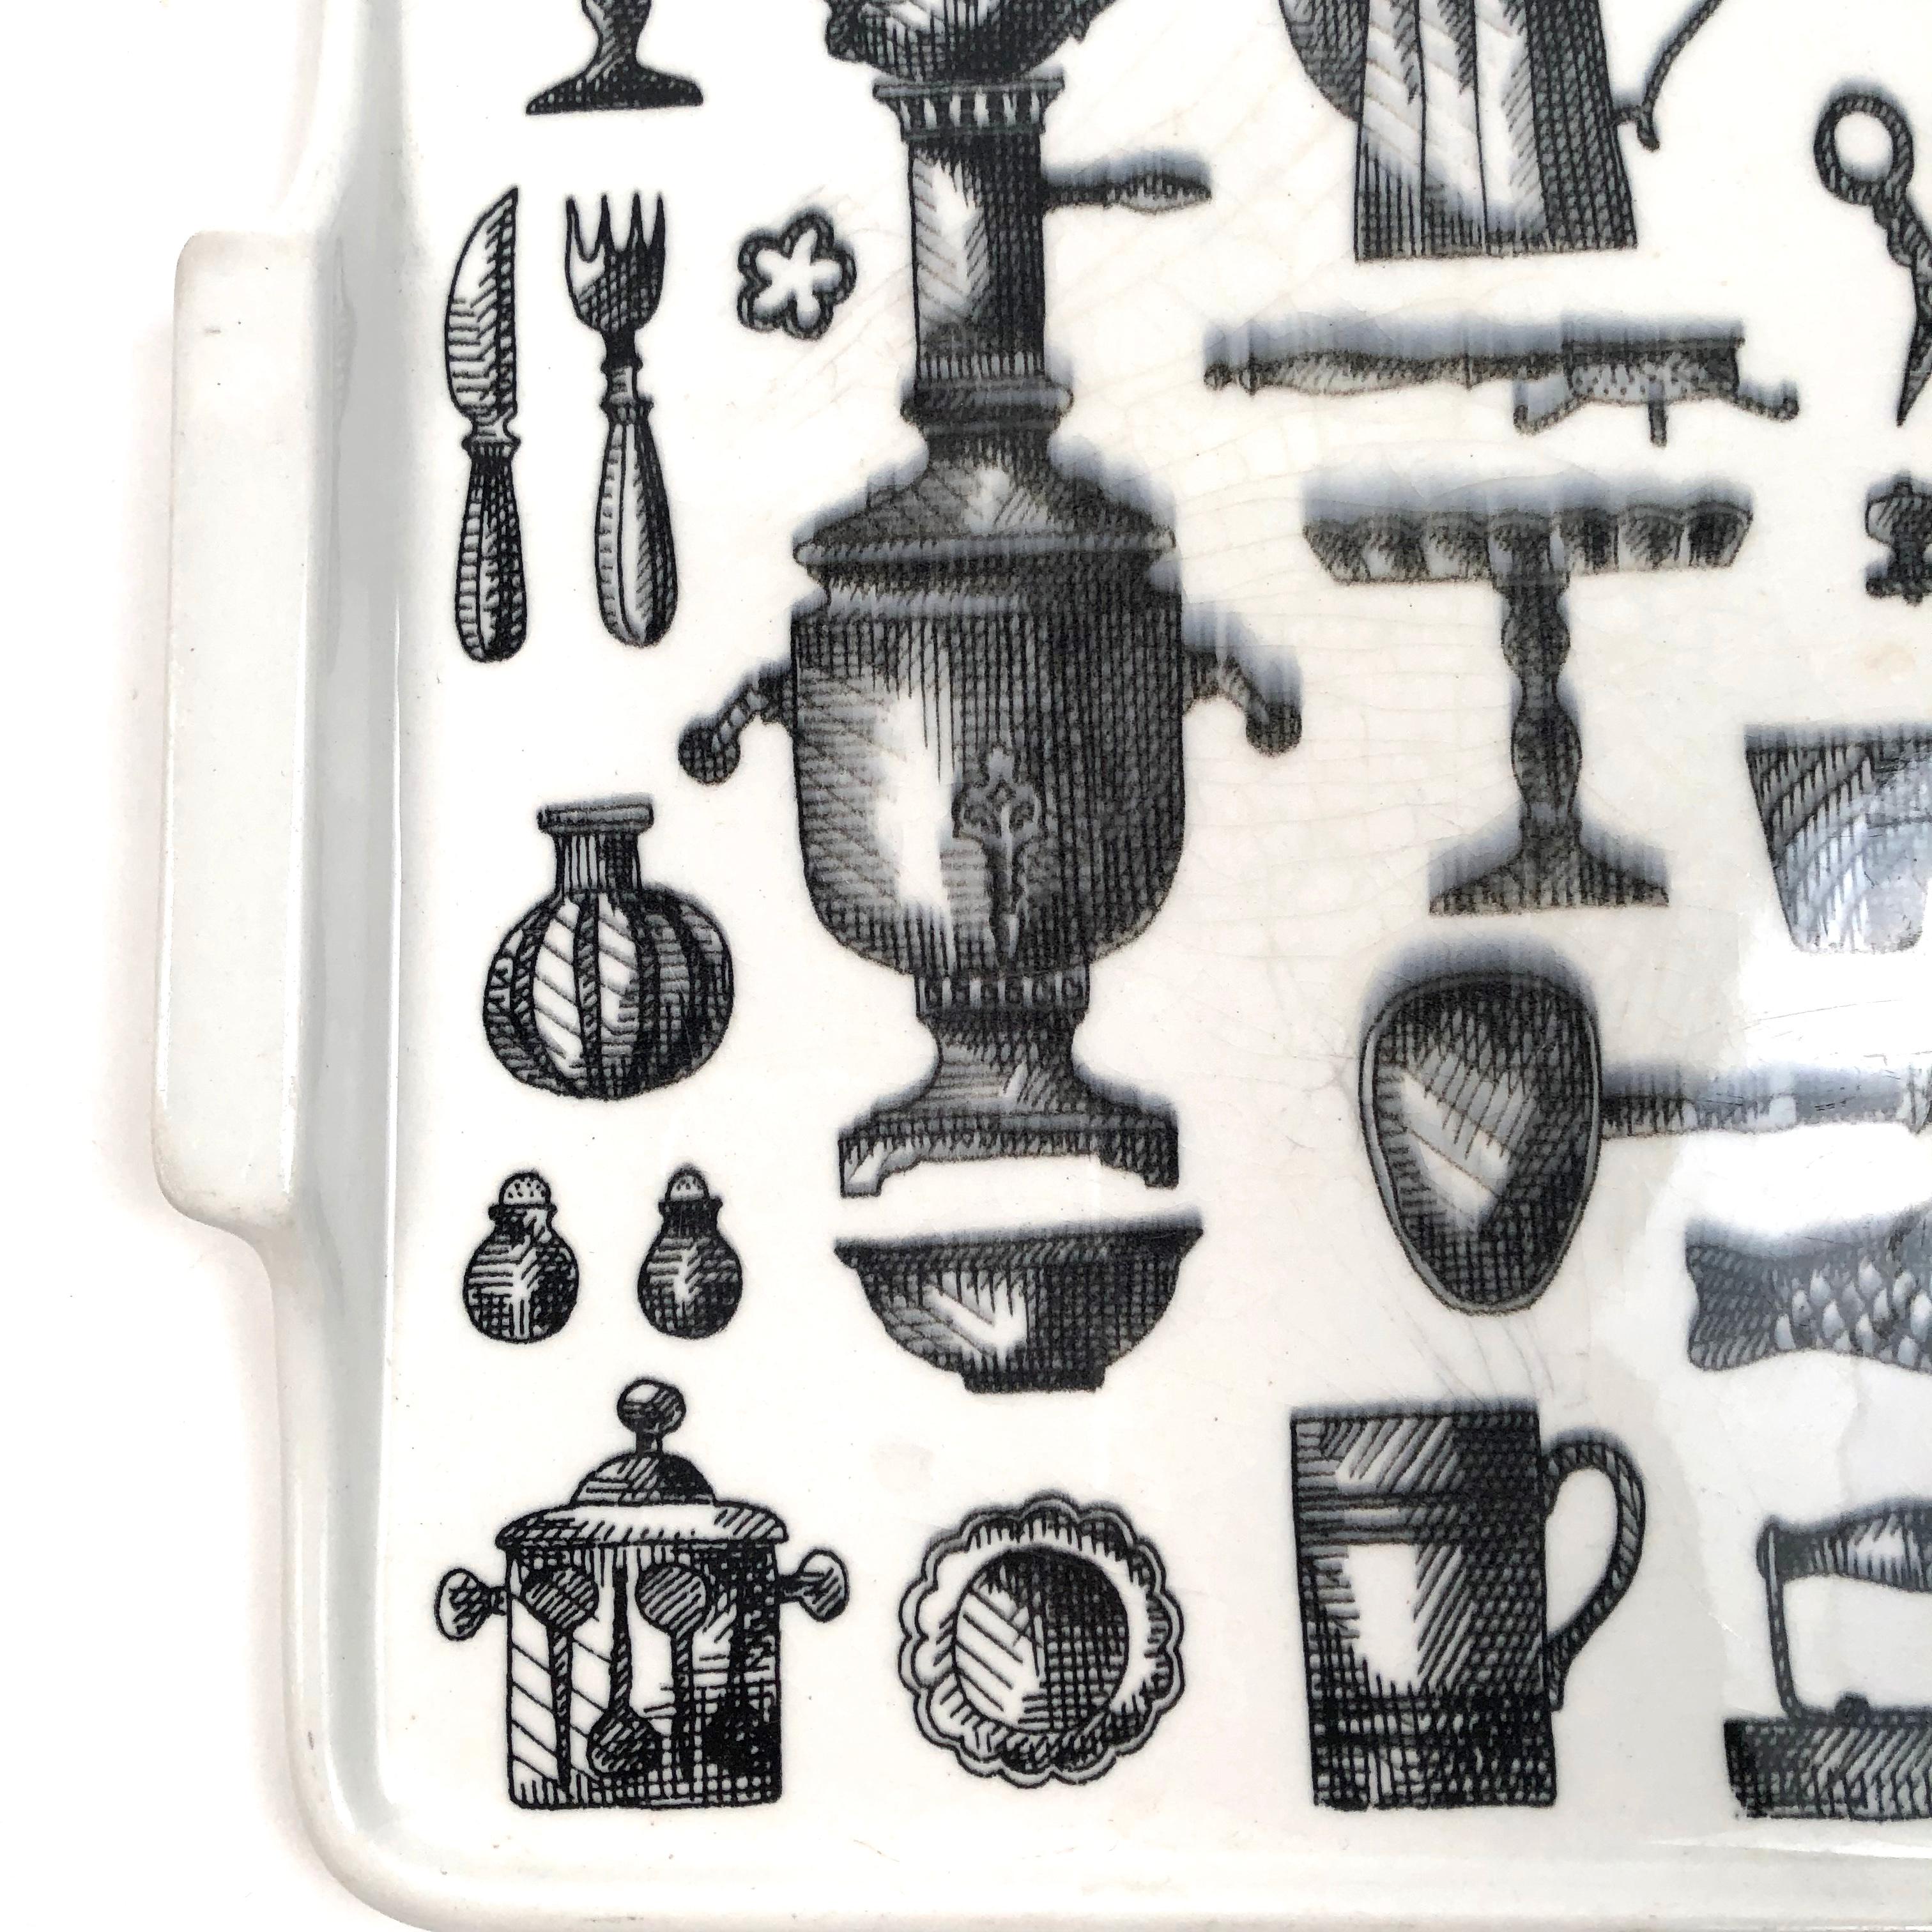 Finnish Back and White Ceramic Tray Decorated with Kitchen Items